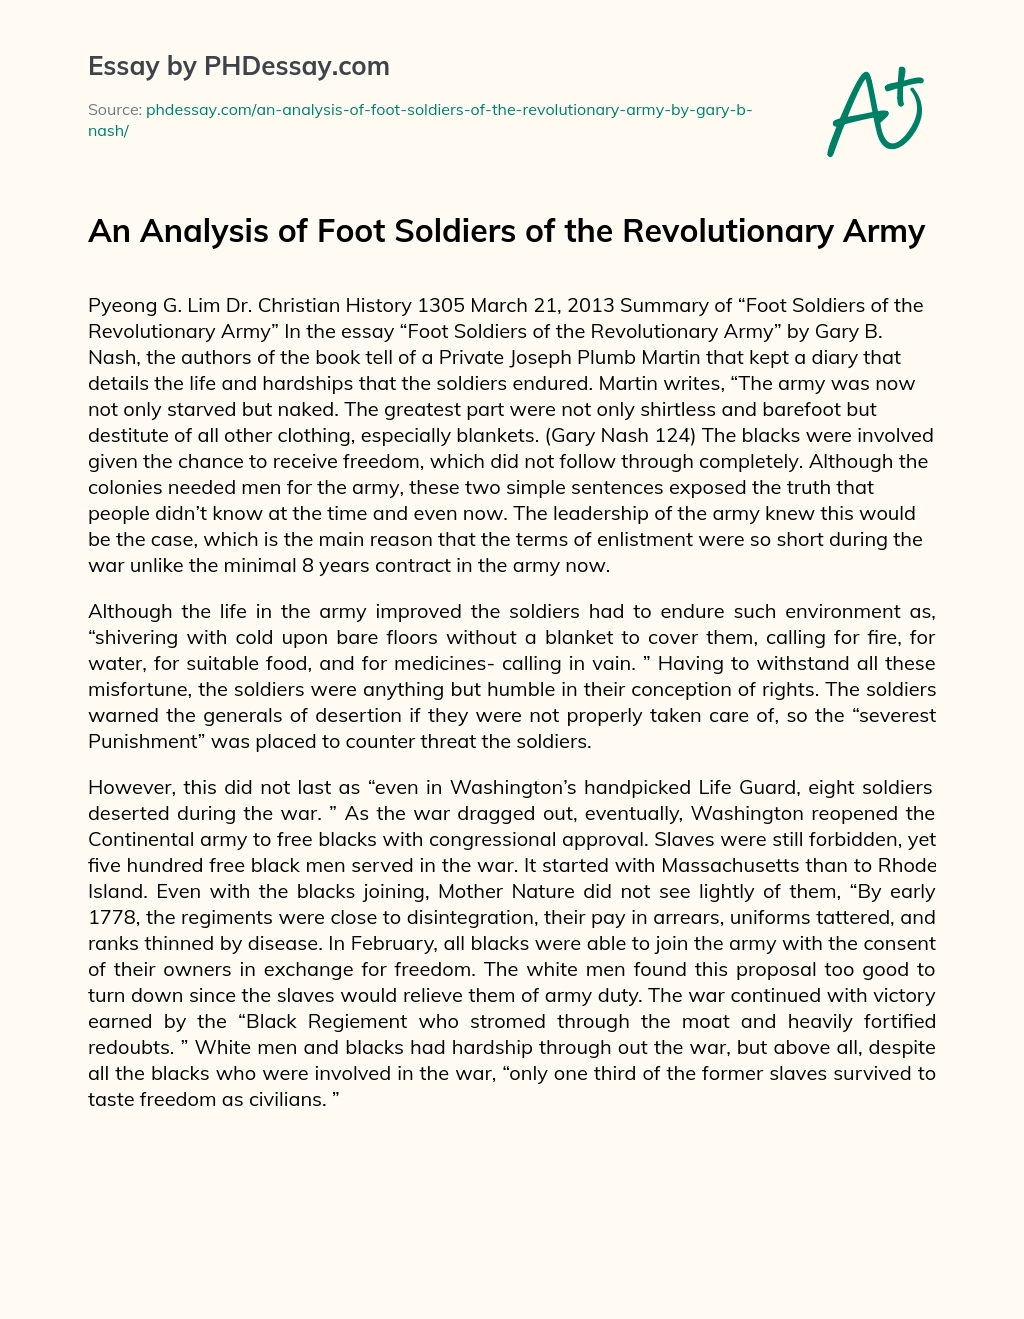 An Analysis of Foot Soldiers of the Revolutionary Army essay